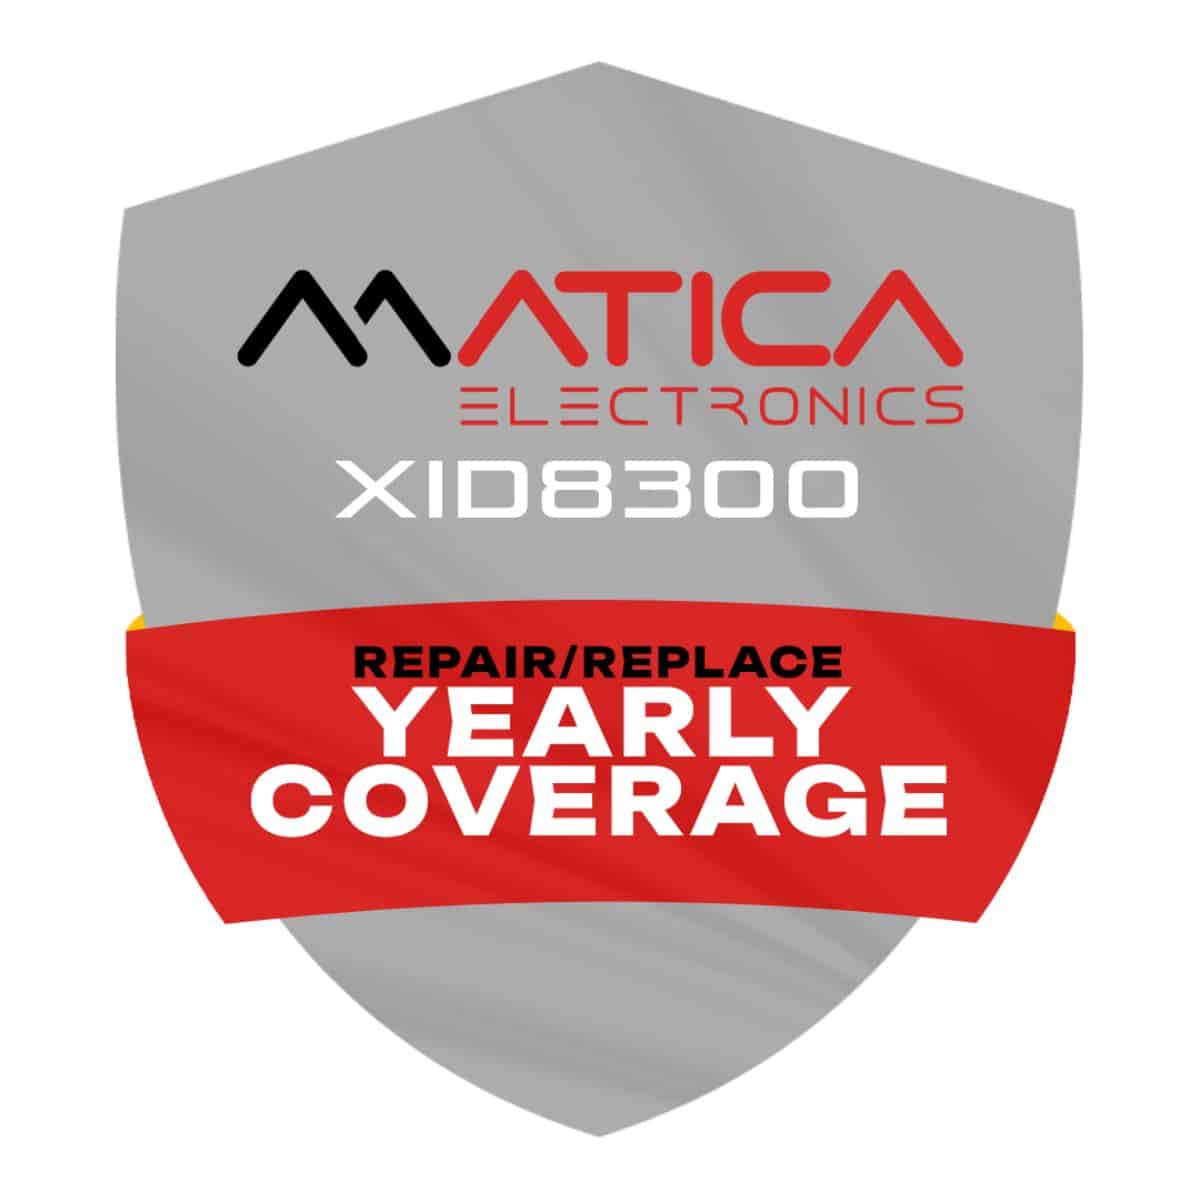 matica XID8300 card printer - repair-replace Yearly coverage